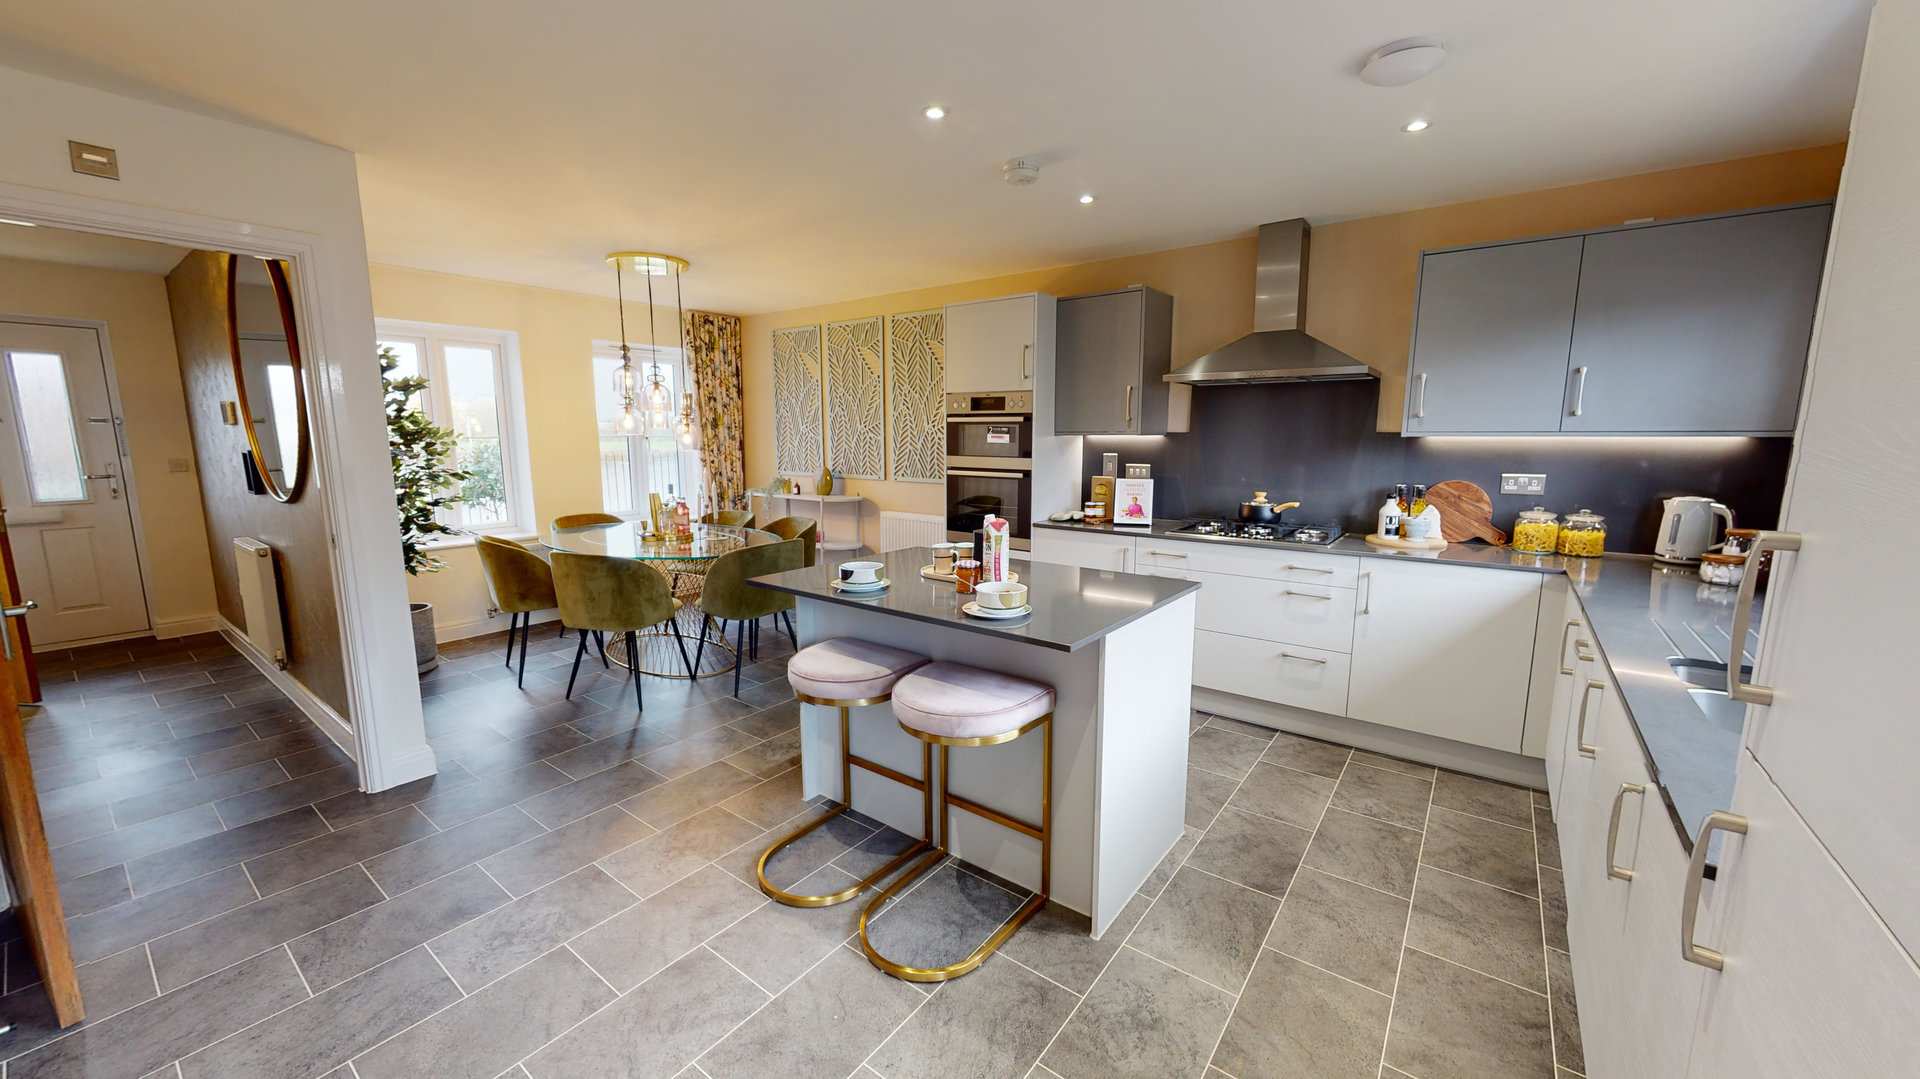 Tropical Themed Show Home in Severn Valley